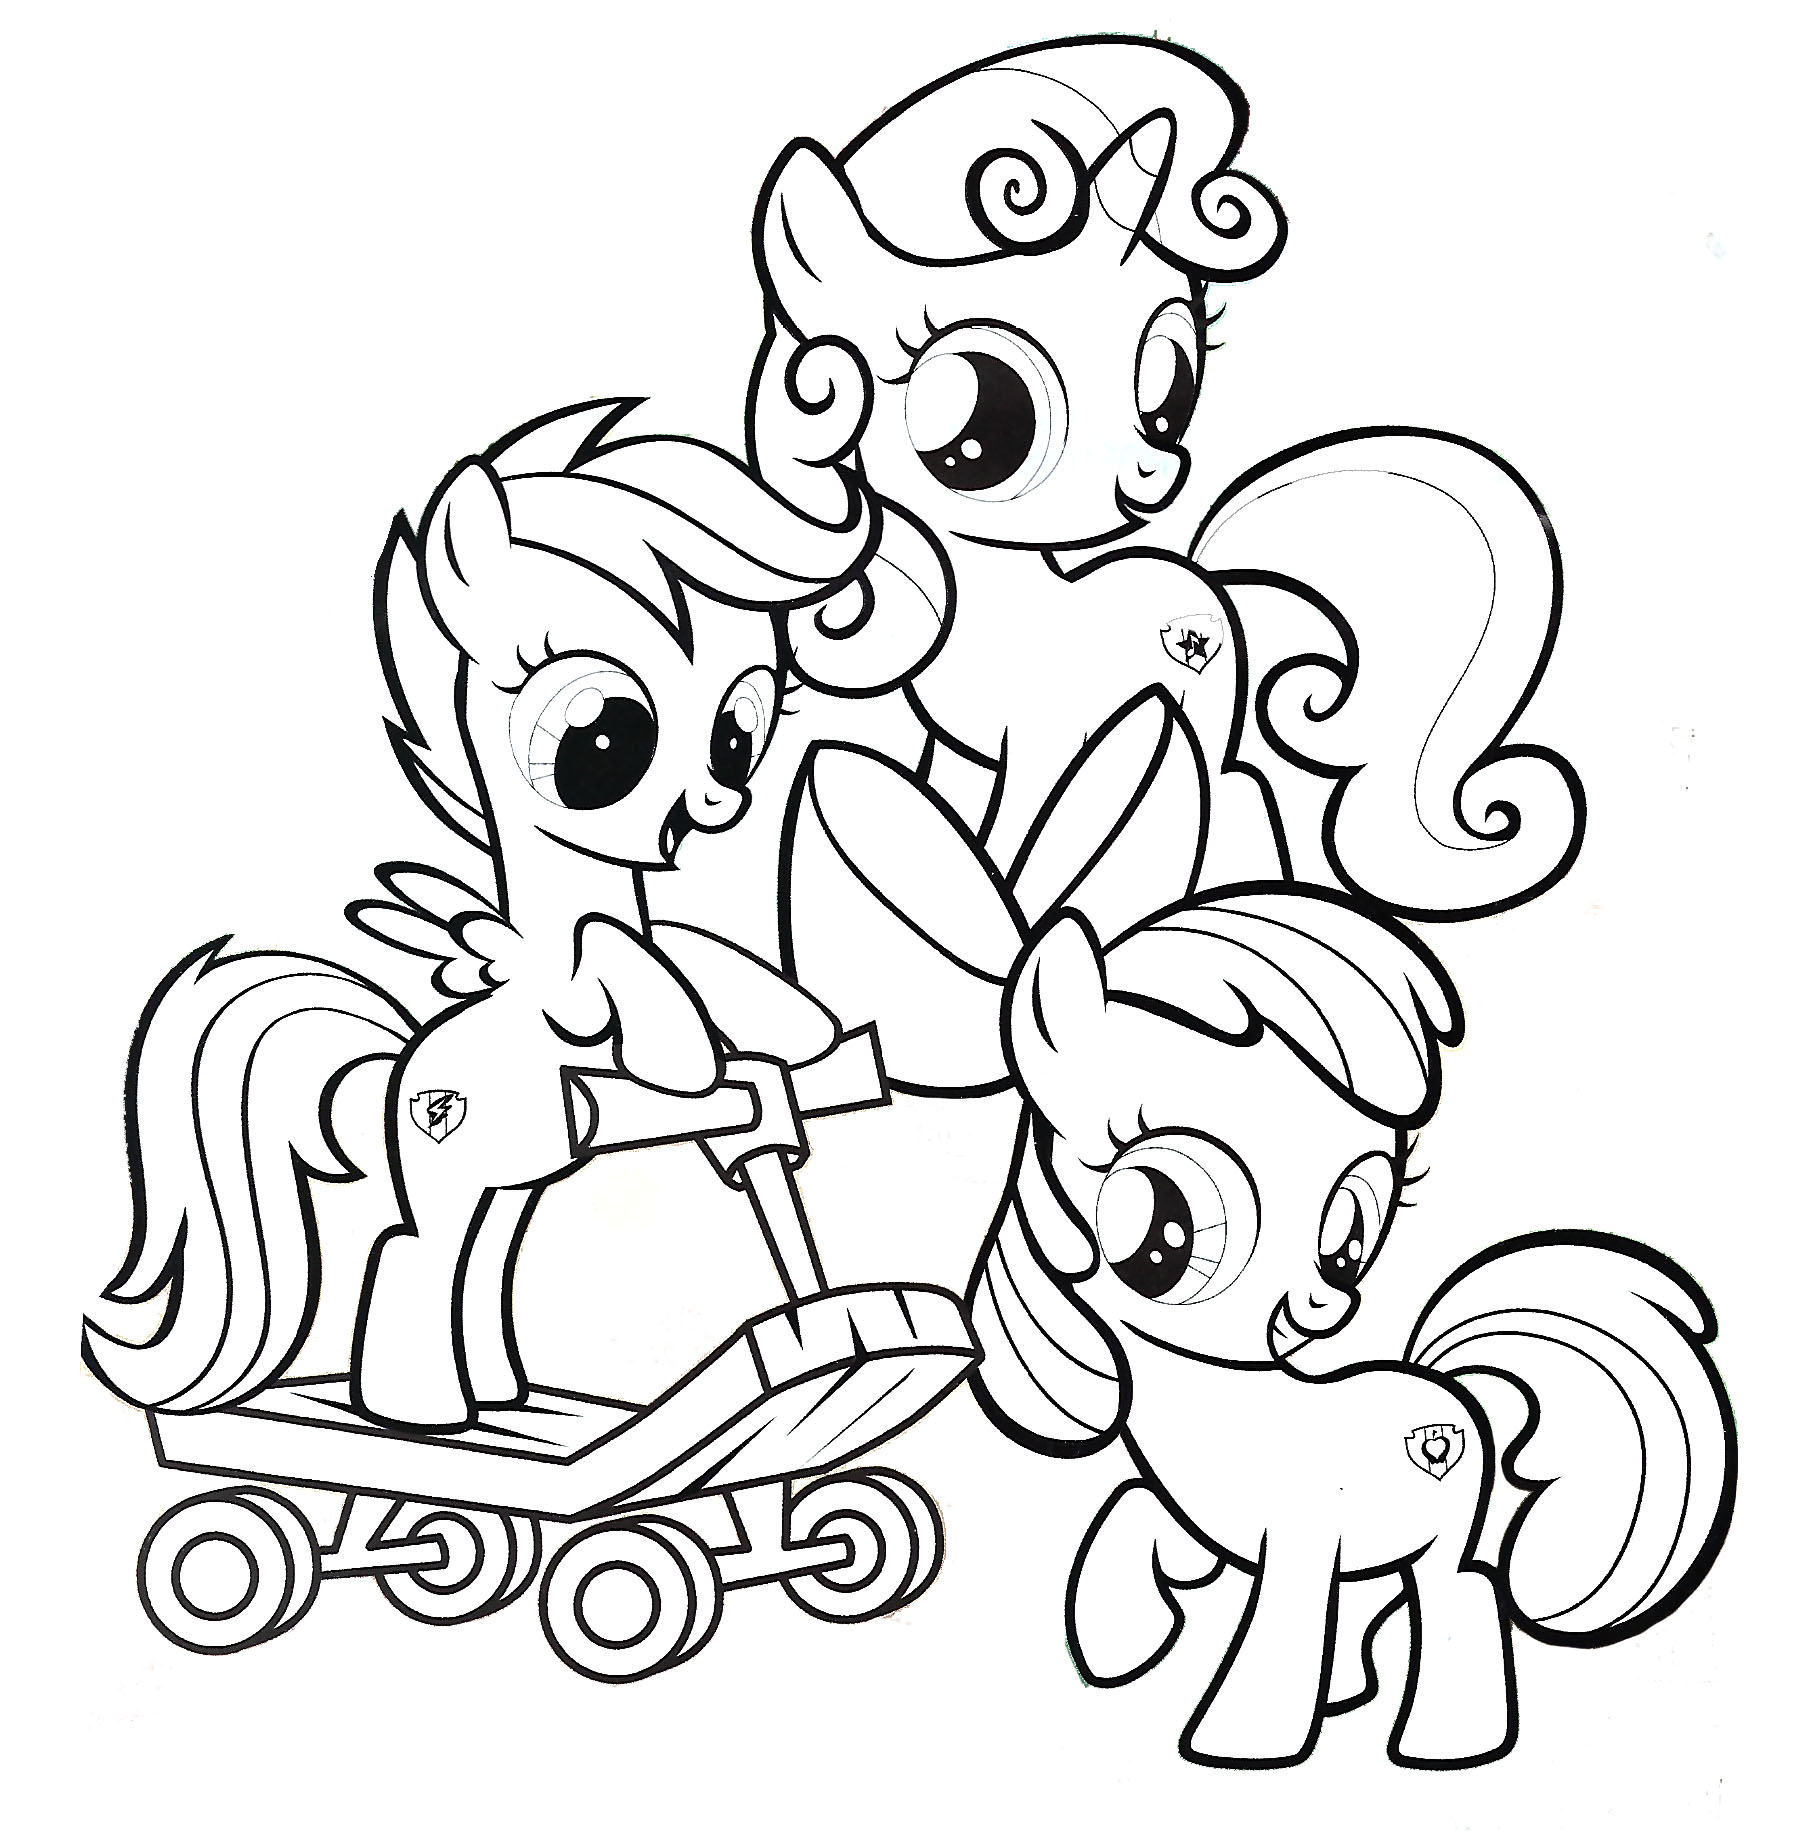 my-little-pony-cutie-mark-crusaders-coloring-pages-at-getcolorings-free-printable